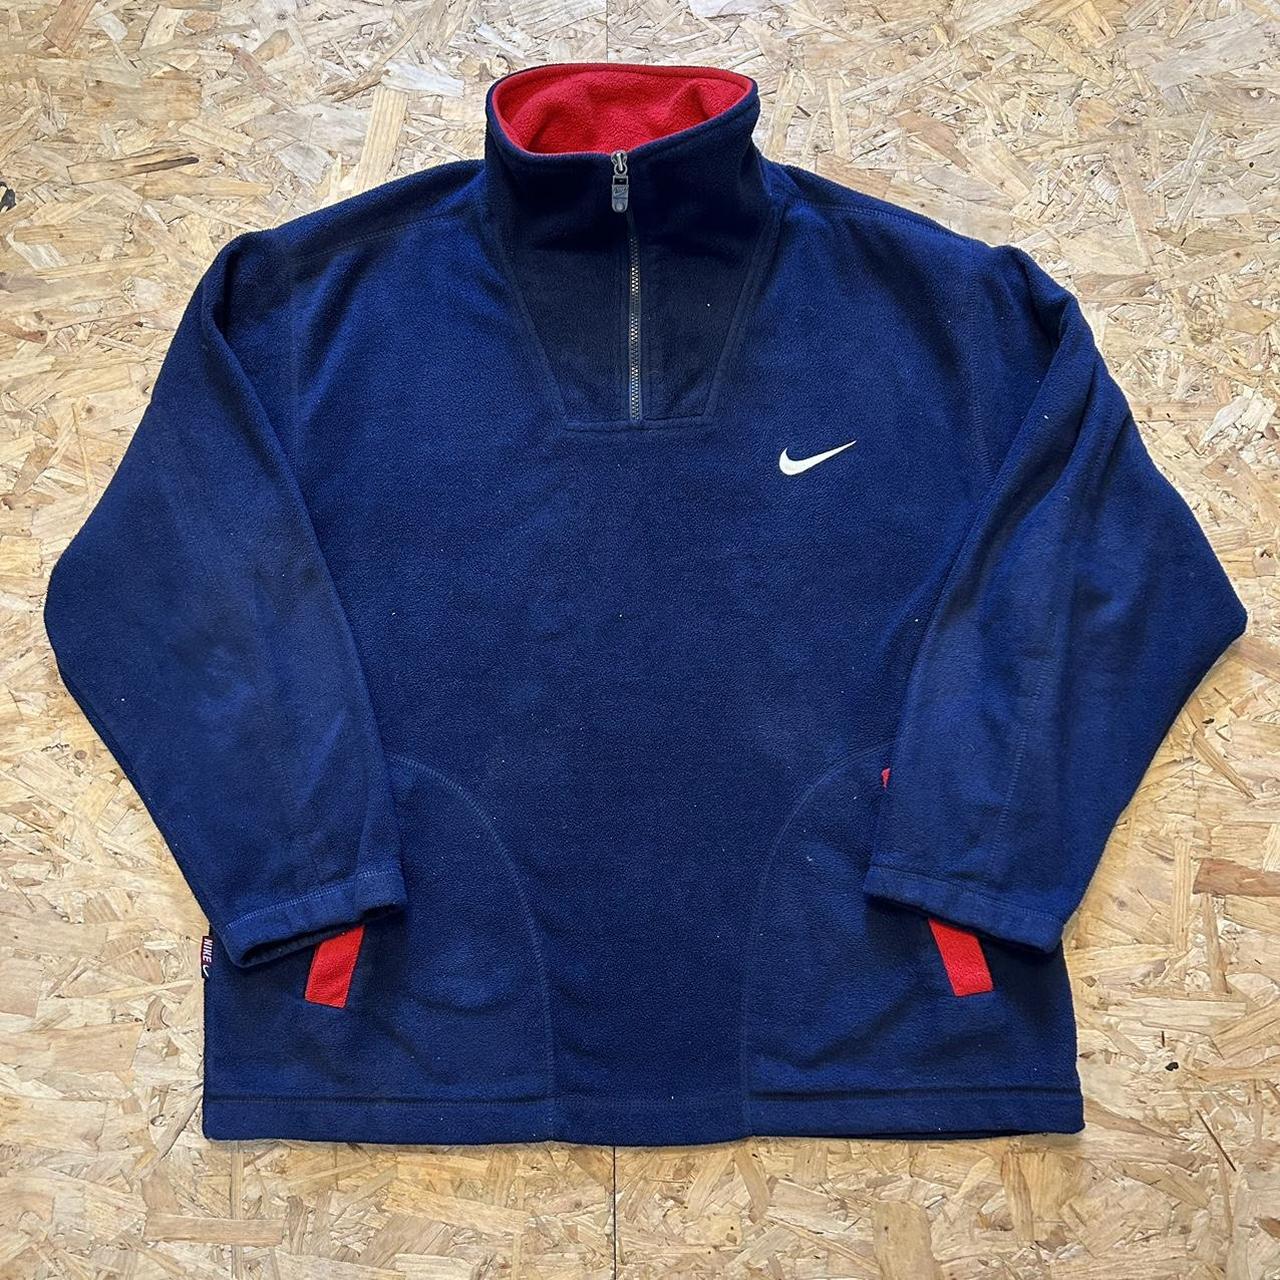 Vintage Navy and Red 90s Nike Fleece Jacket | Small... - Depop